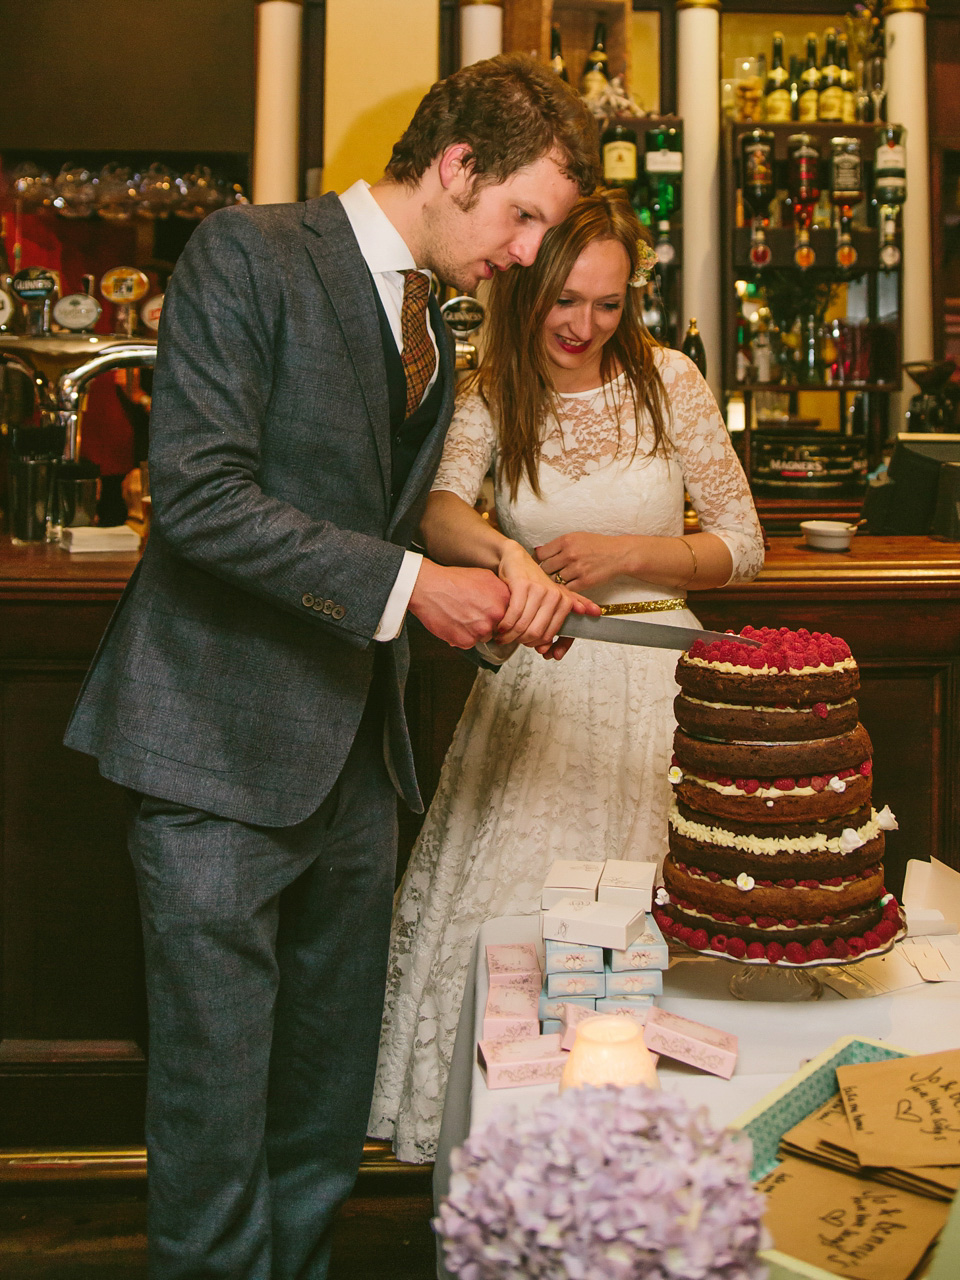 The bride wears a 1950's vintage inspired wedding dress by Fur Coat No Knickers for their very British London pub wedding. Photography by Marc Hayden.